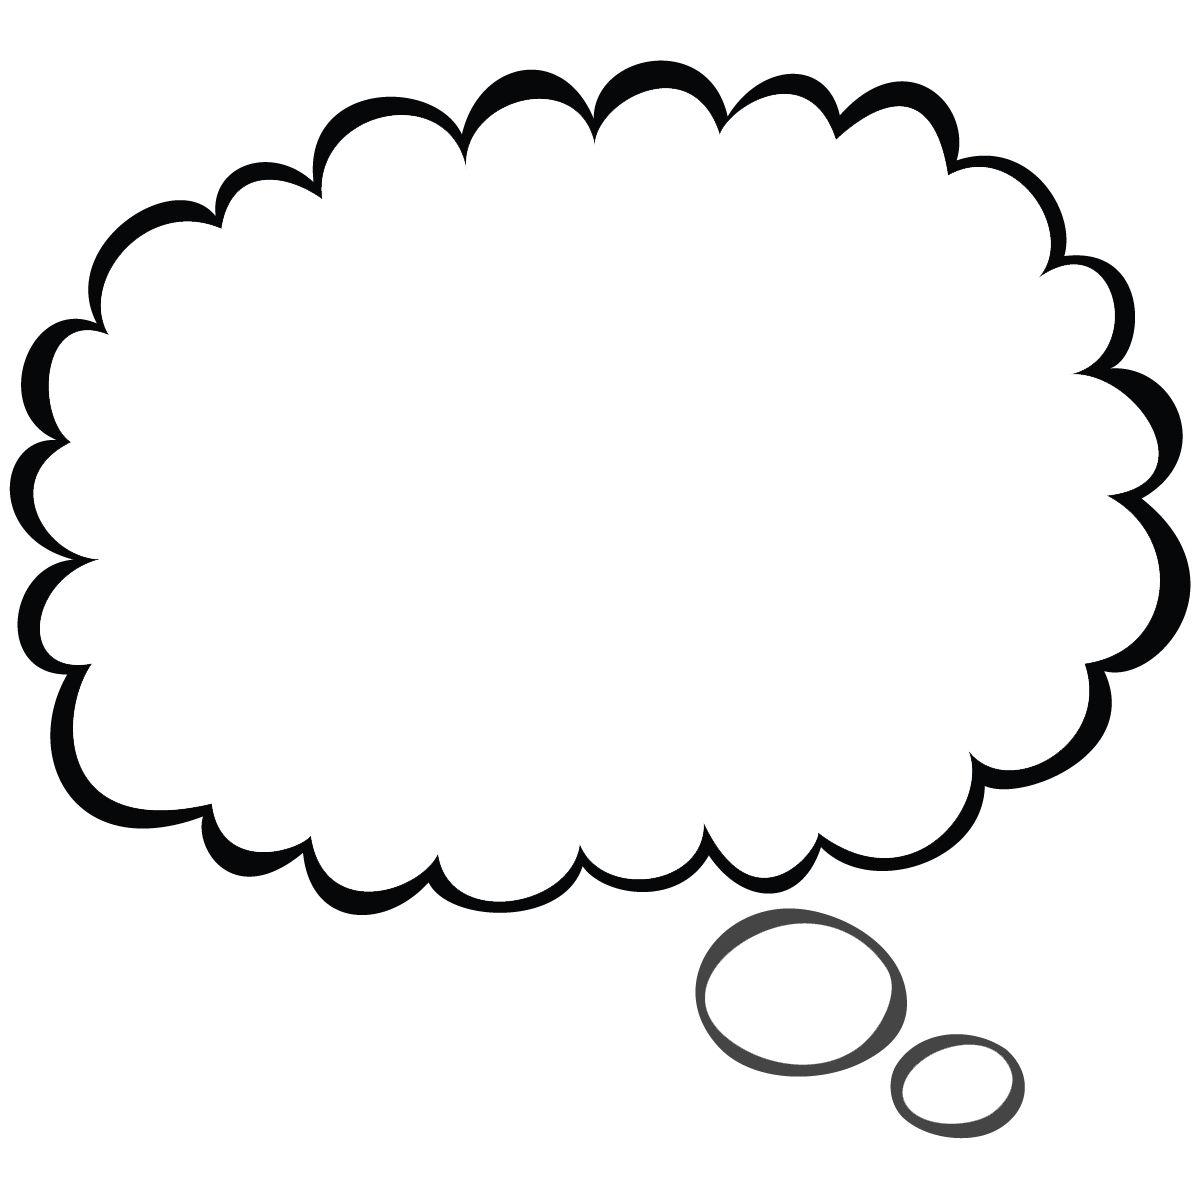 Word bubble thought cloud clip art at vector clip art image #21598